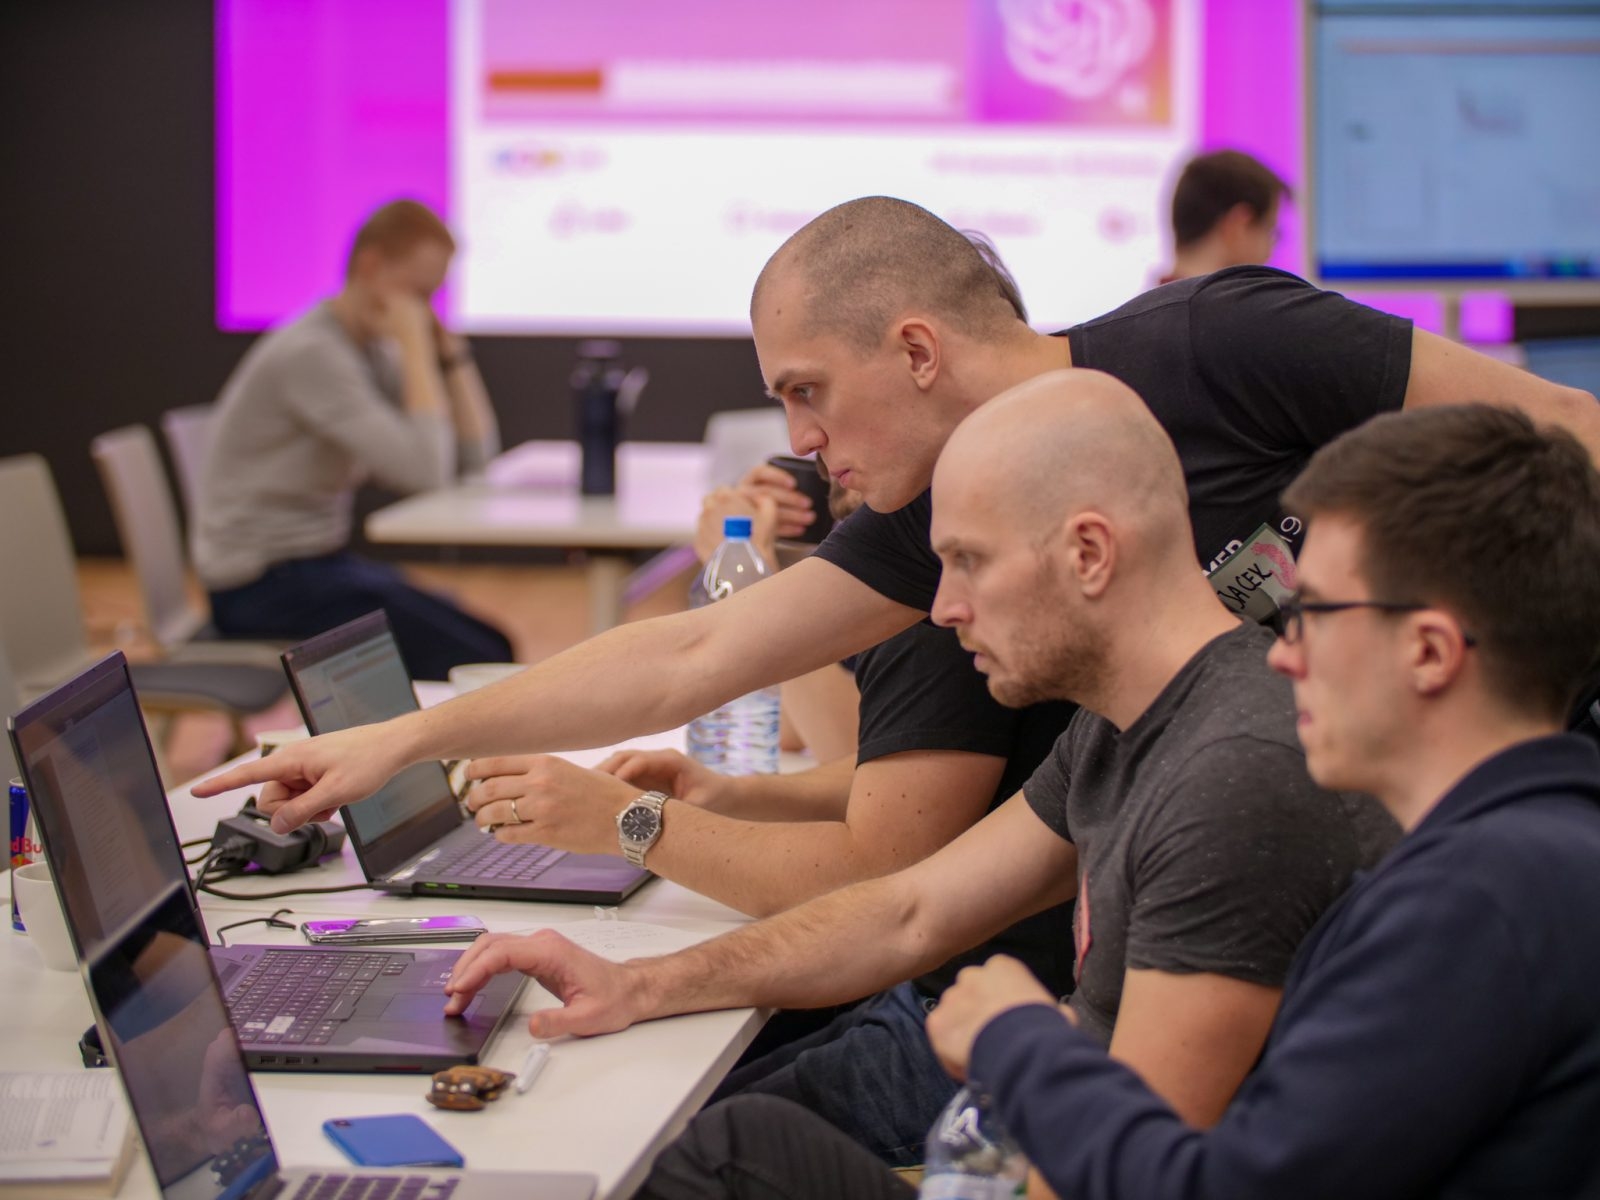 👉 The challenge for this hackathon is to use OpenAI Whisper, GPT-3, Codex, or DALL-E 2 to create an innovative solution to a real-world problem. Whether you're interested in using AI to improve communication, streamline workflows, or build entirely new applications, this is your chance to show off your skills and explore the potential of these advanced AI technologies.